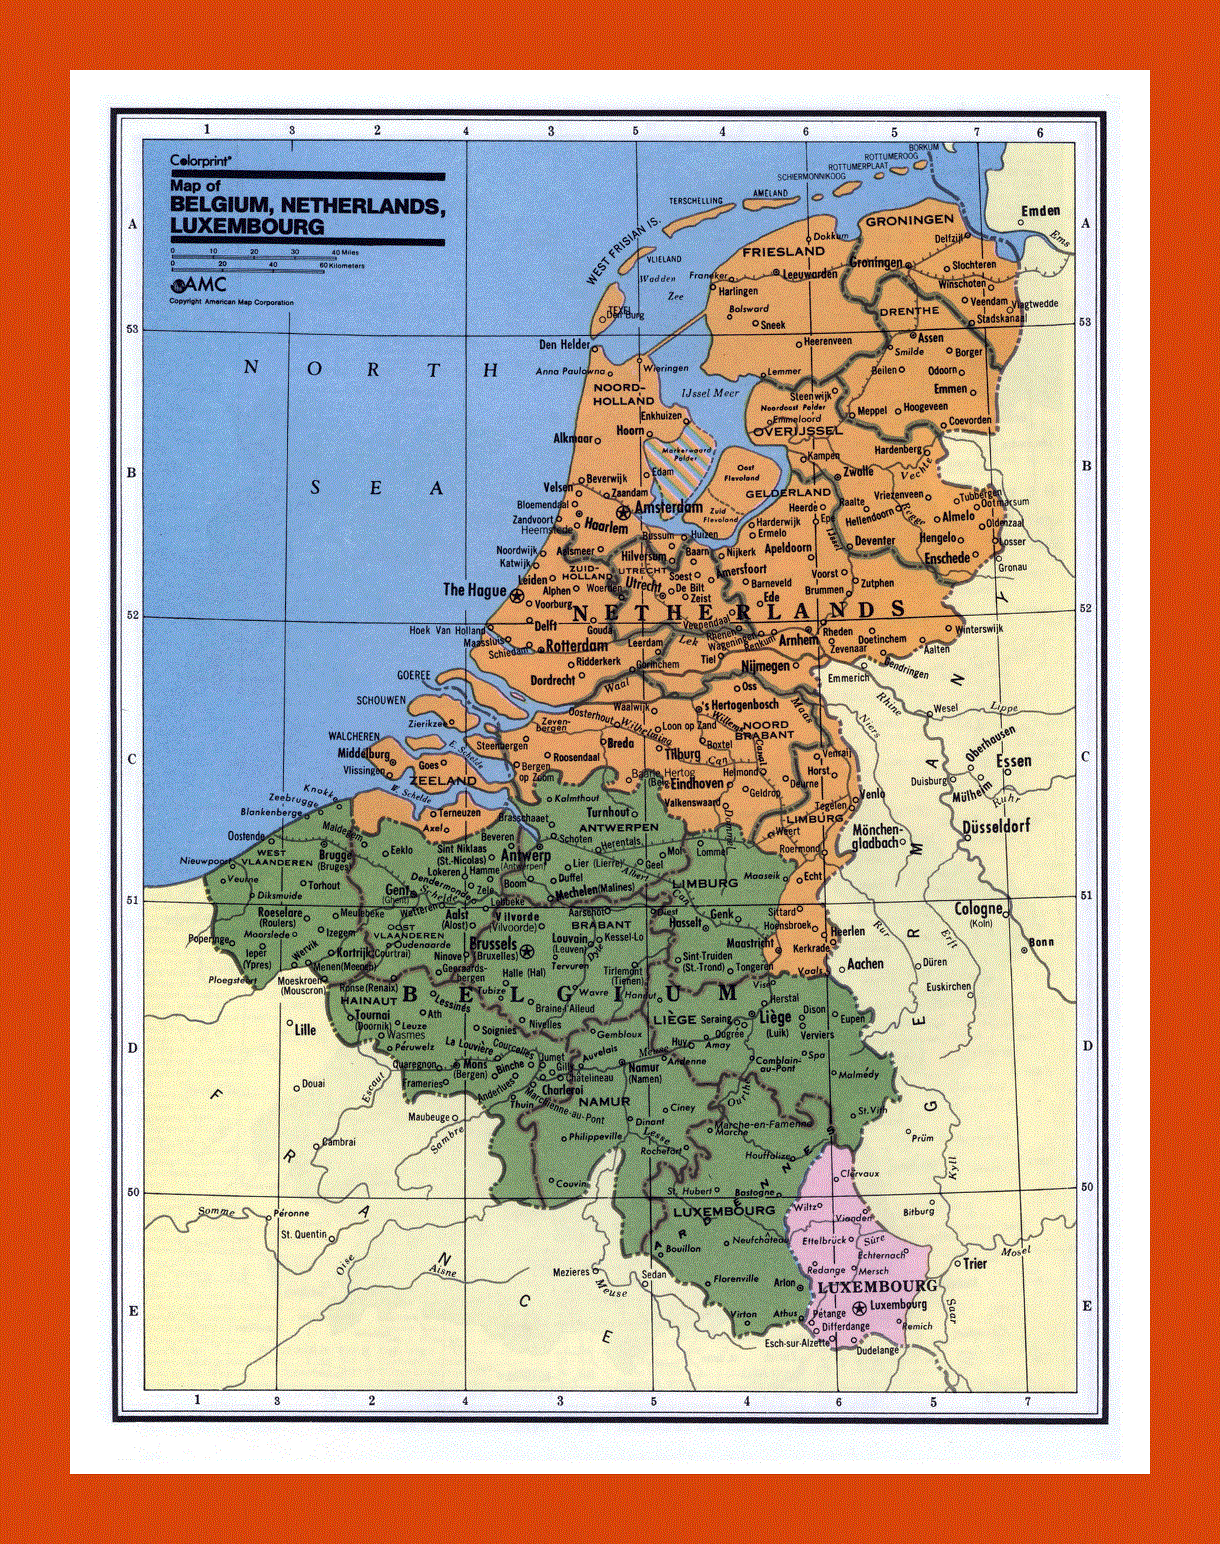 Political and administrative map of Belgium, Netherlands and Luxembourg